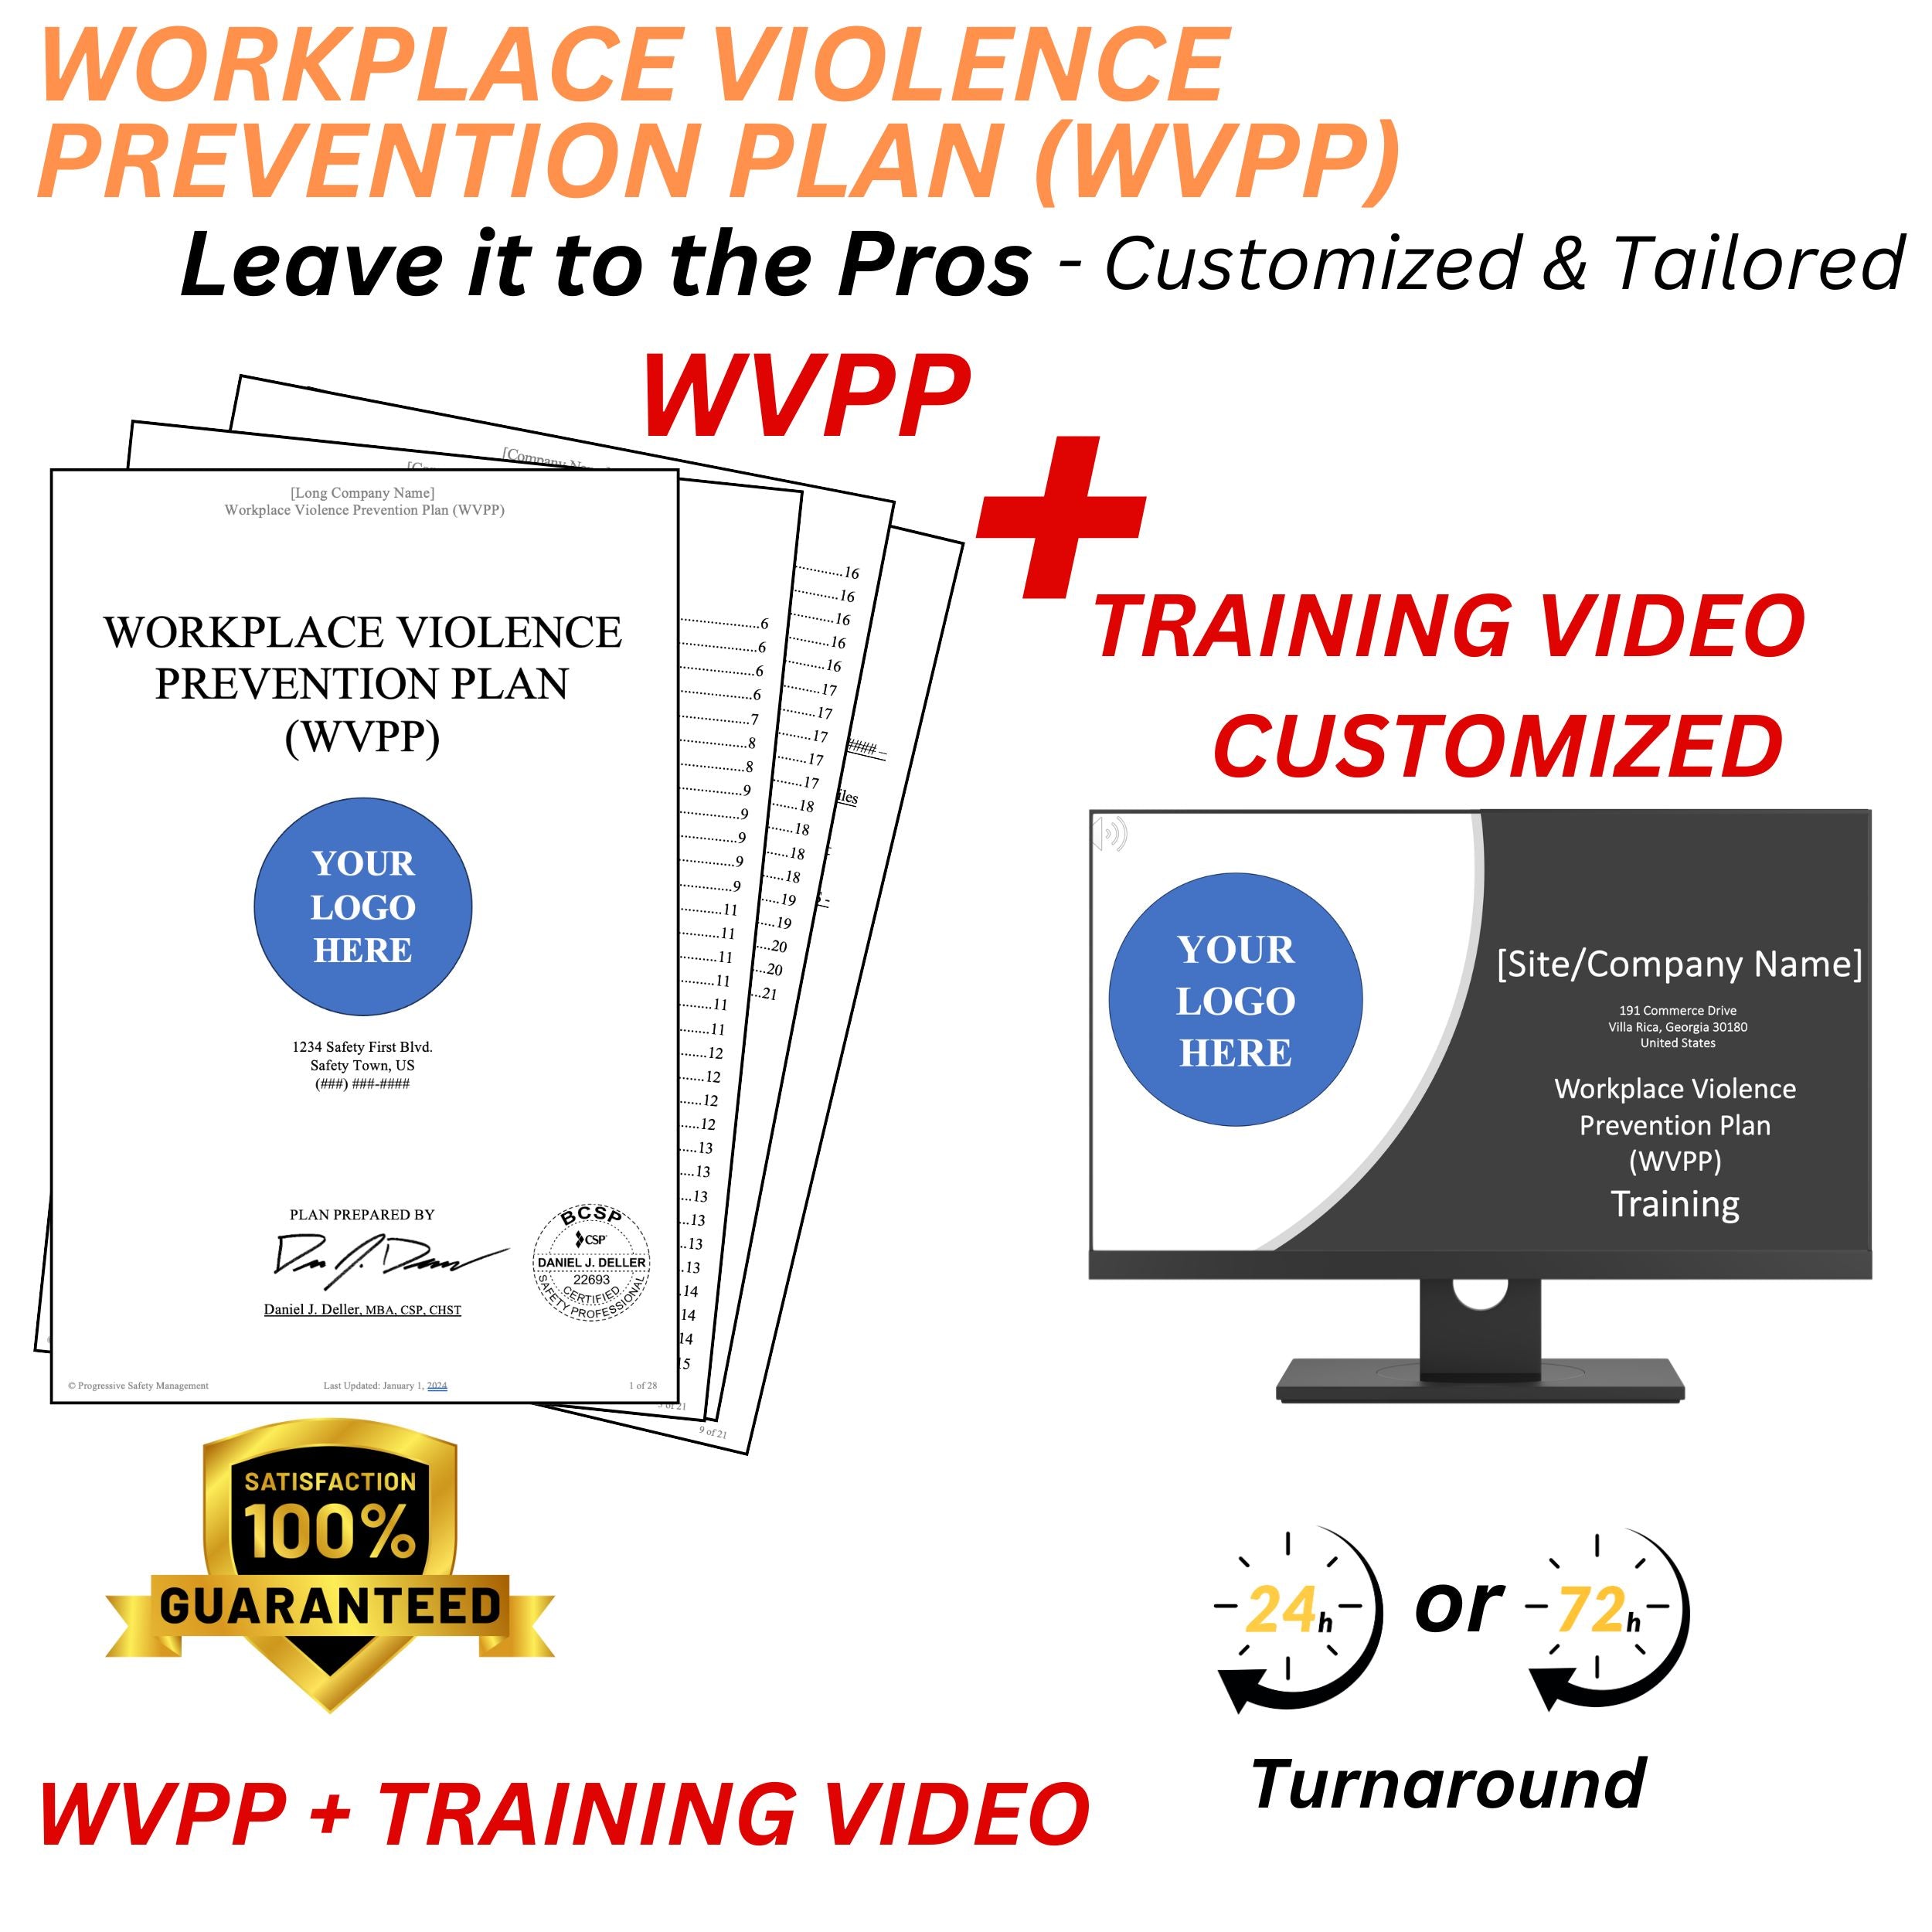 WVPP - Workplace Violence Prevention Plan